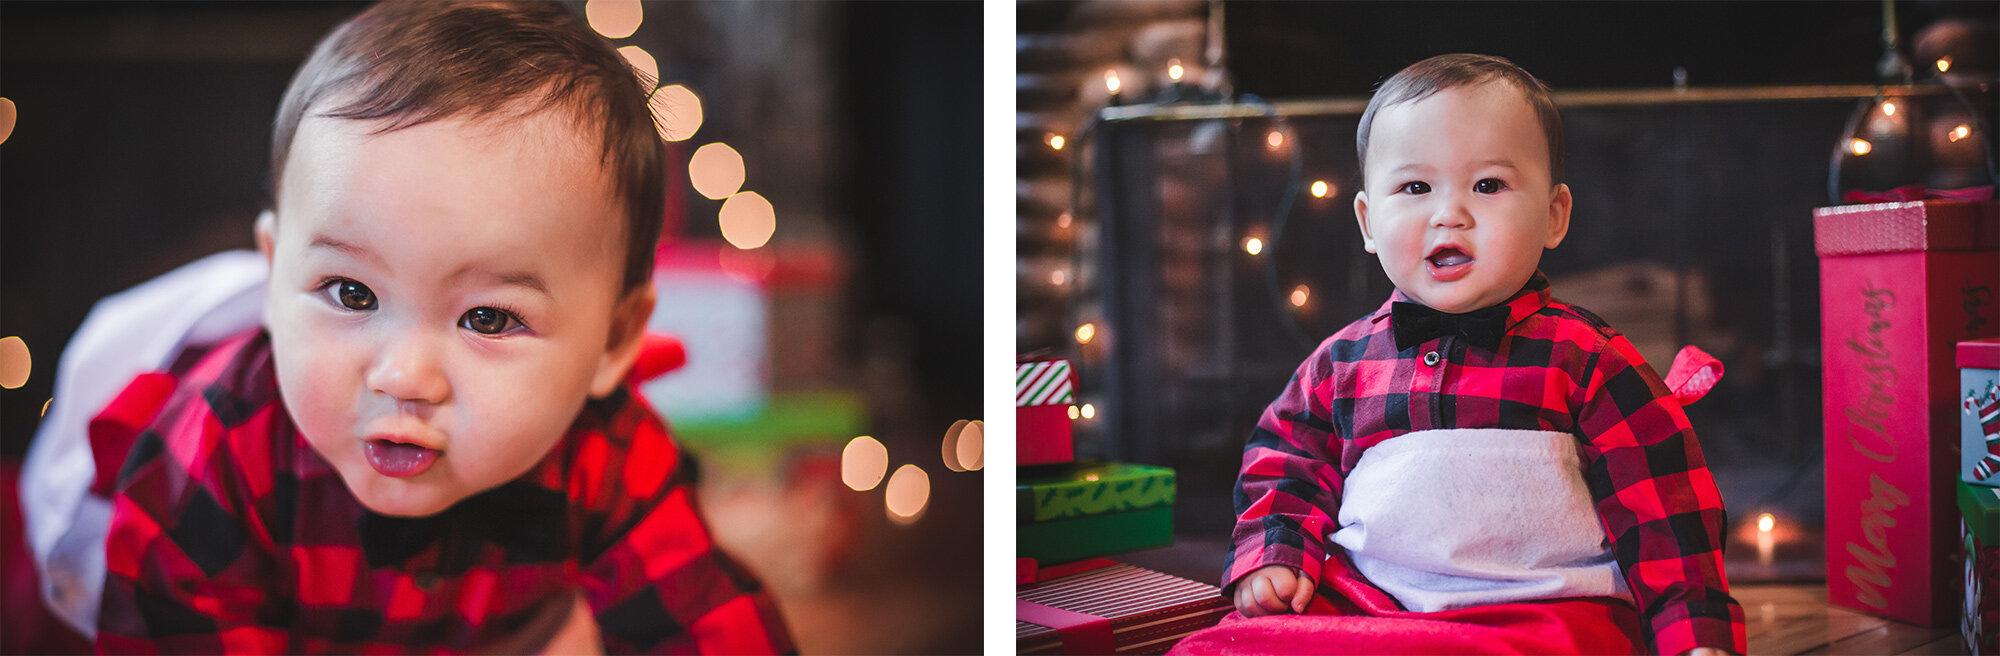 Somerville Holiday Family Portrait Photographer | Stephen Grant Photography